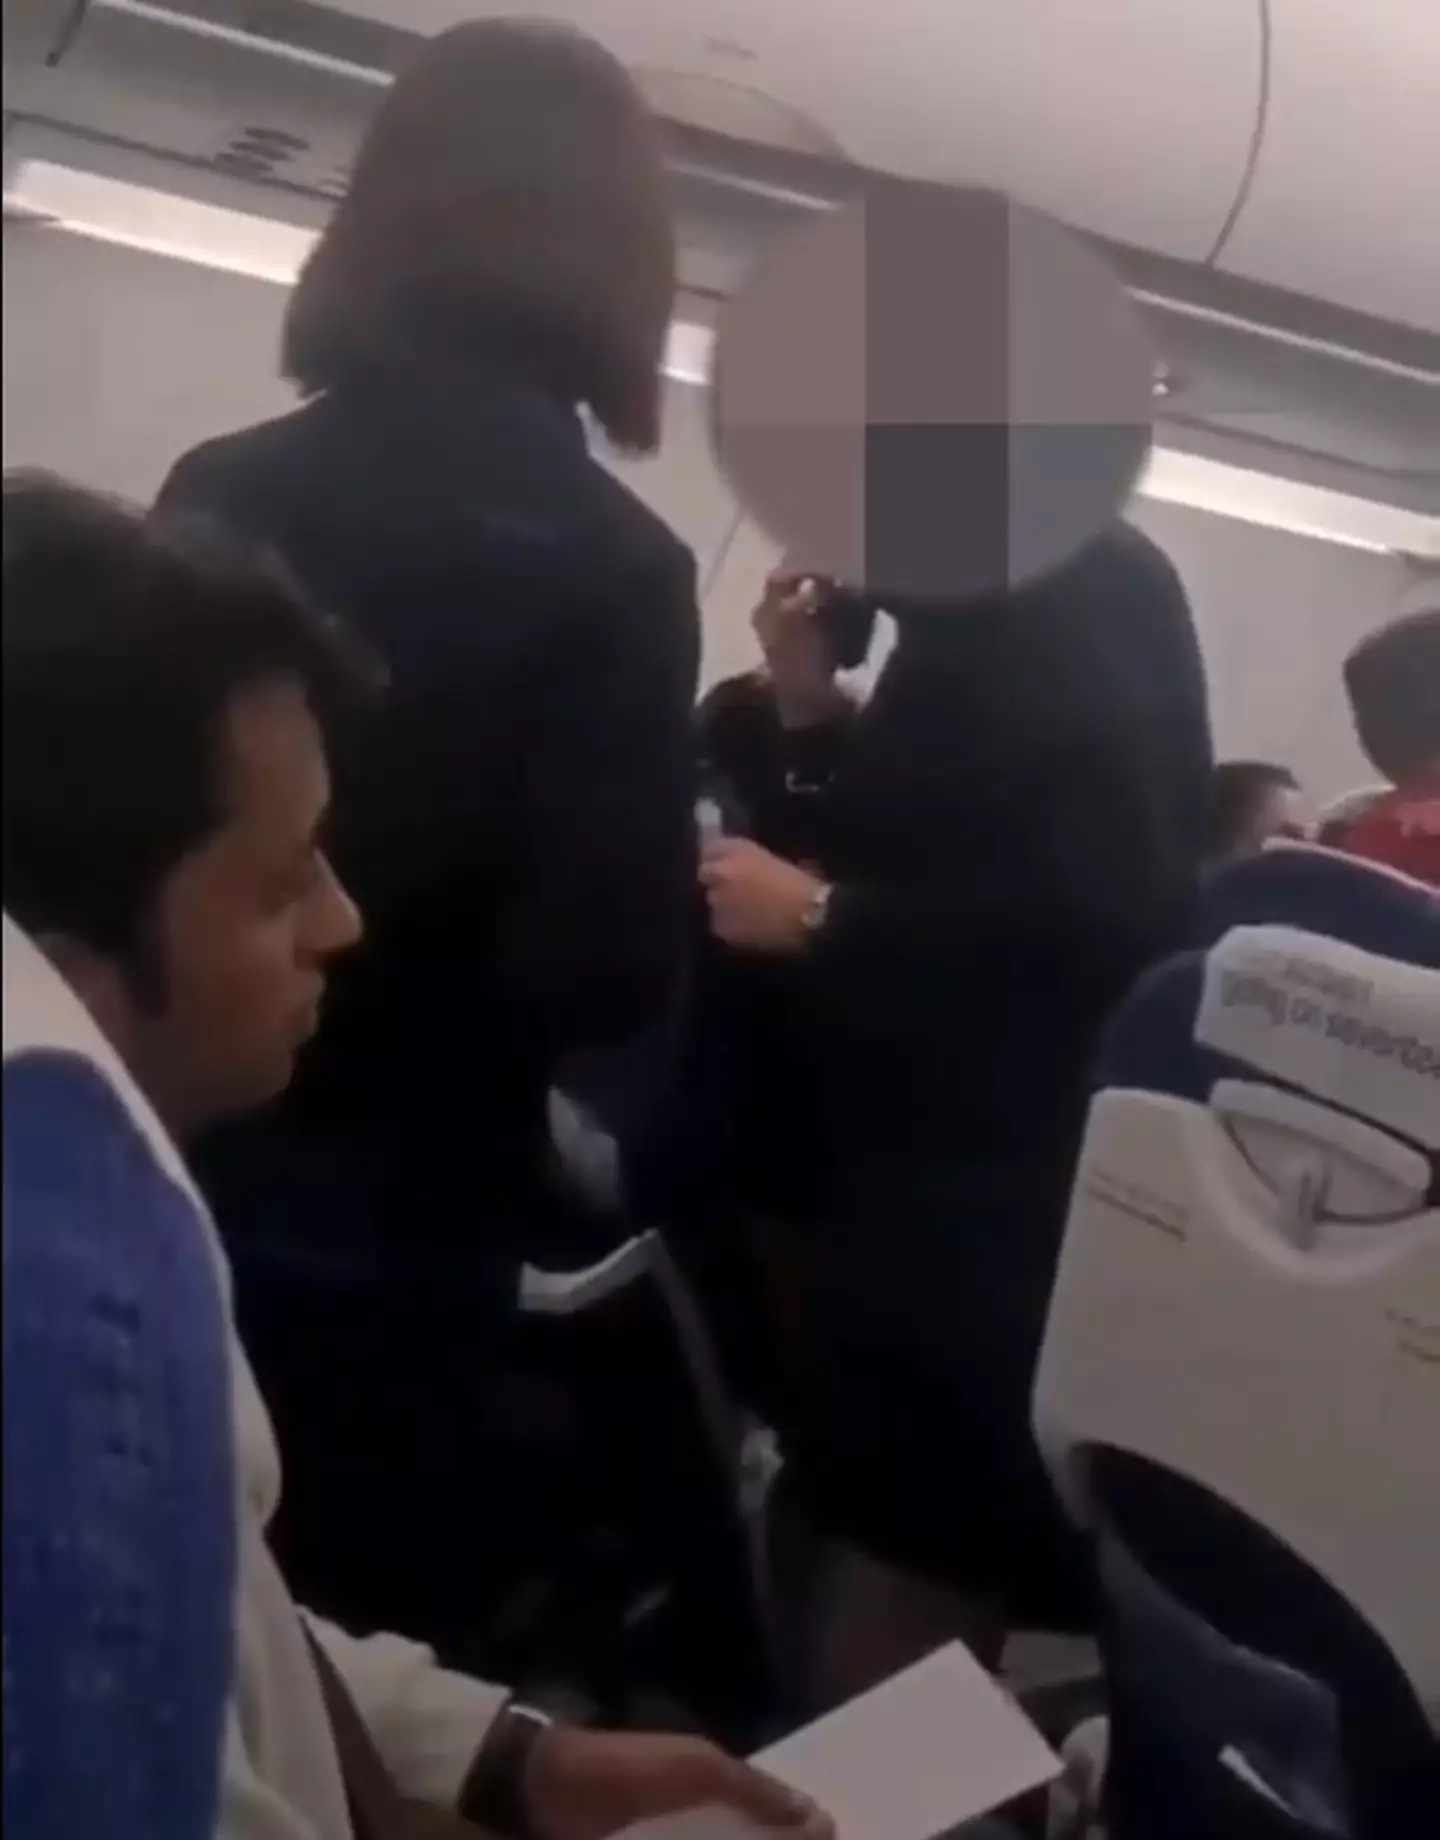 'Don't yell', the man yelled at the flight attendant after calling her a servant.